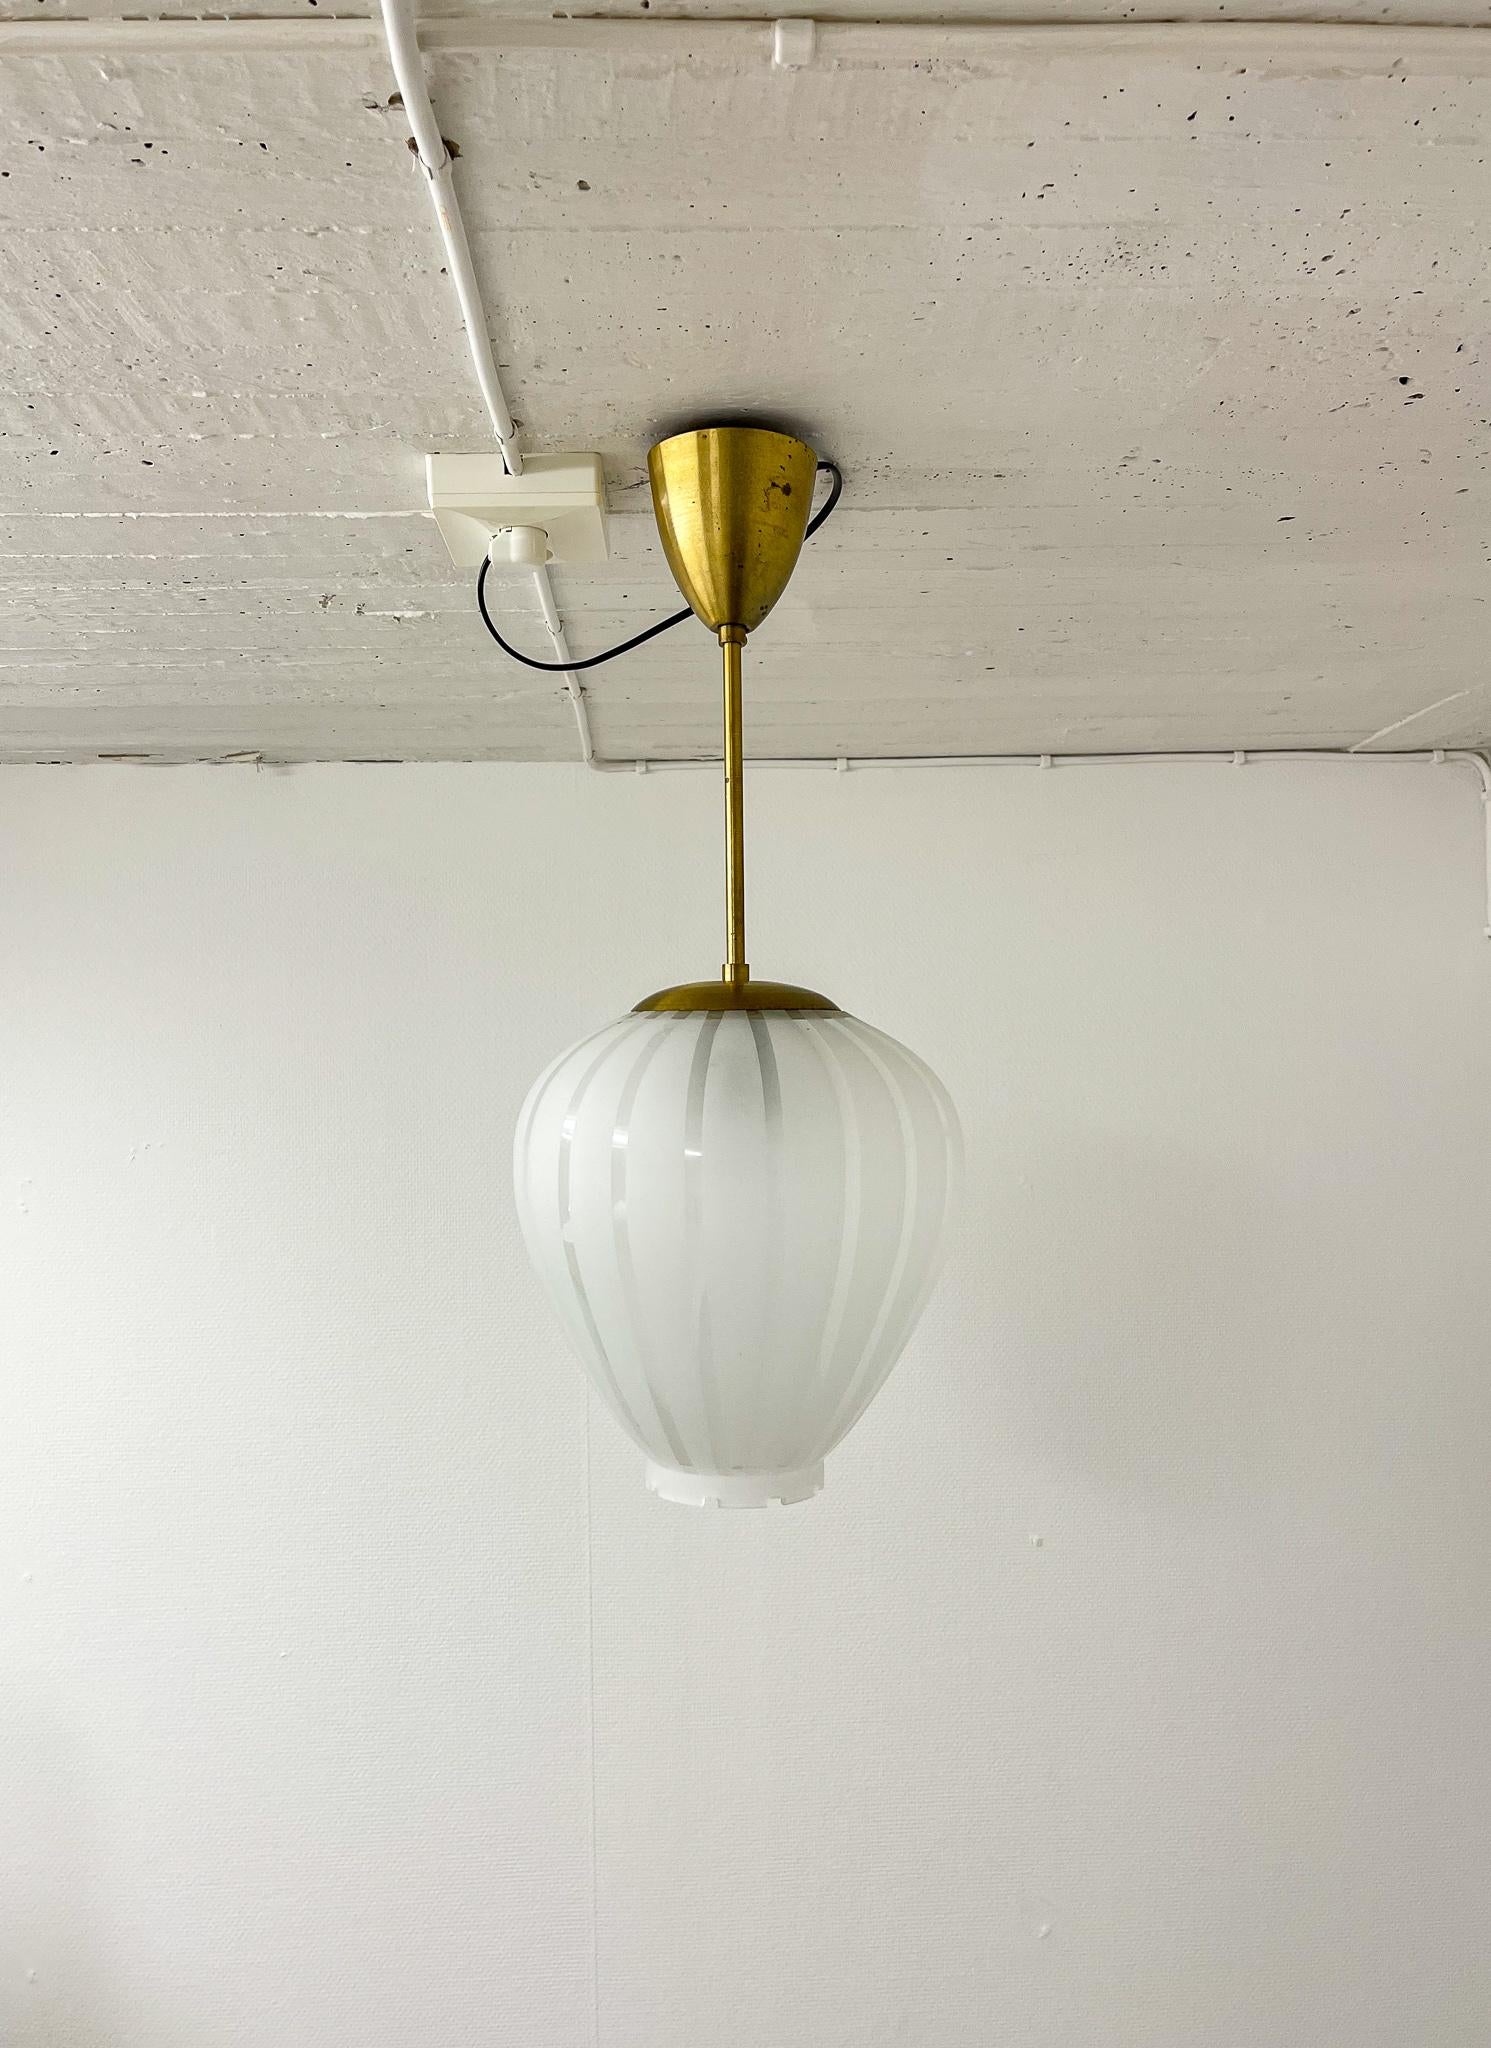 Elegant, middle size rounded pendant in brass and glass produced in Sweden. The frosted glass gives a beautiful and soft light, and the brass parts have a nice natural patina. The bottom of the glass with art deco edges.

Condition: Good original